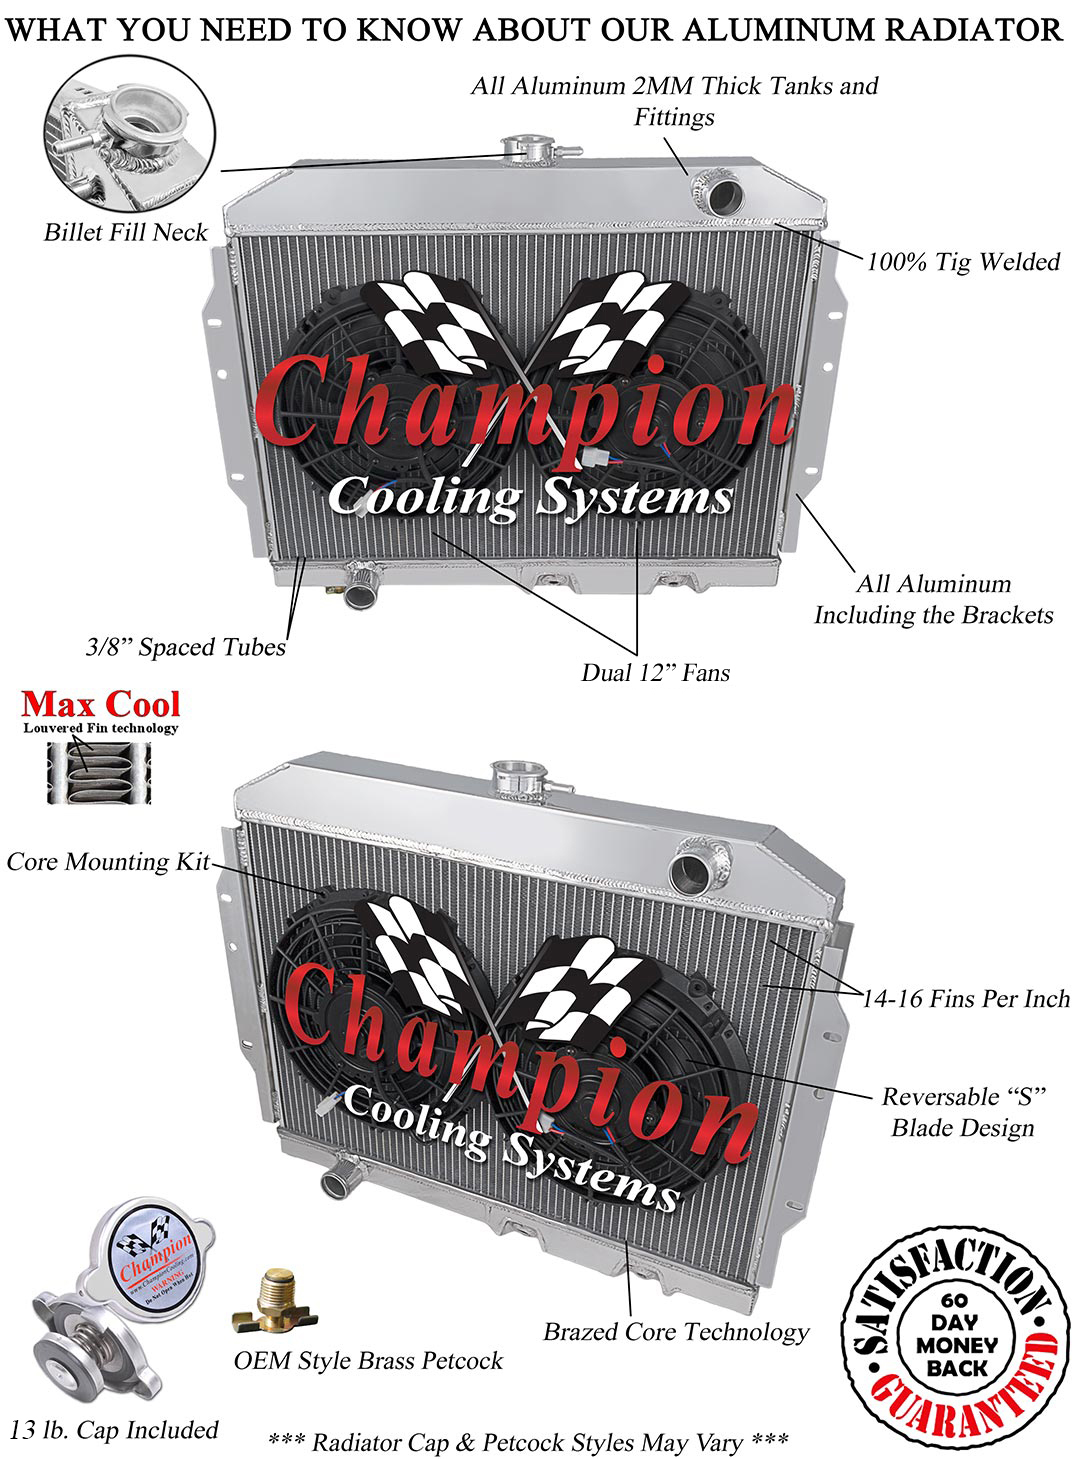 https://www.championcooling.com/photos/Photos%20White/With%20Fans/Combos/407/407_2f_d_w.jpg